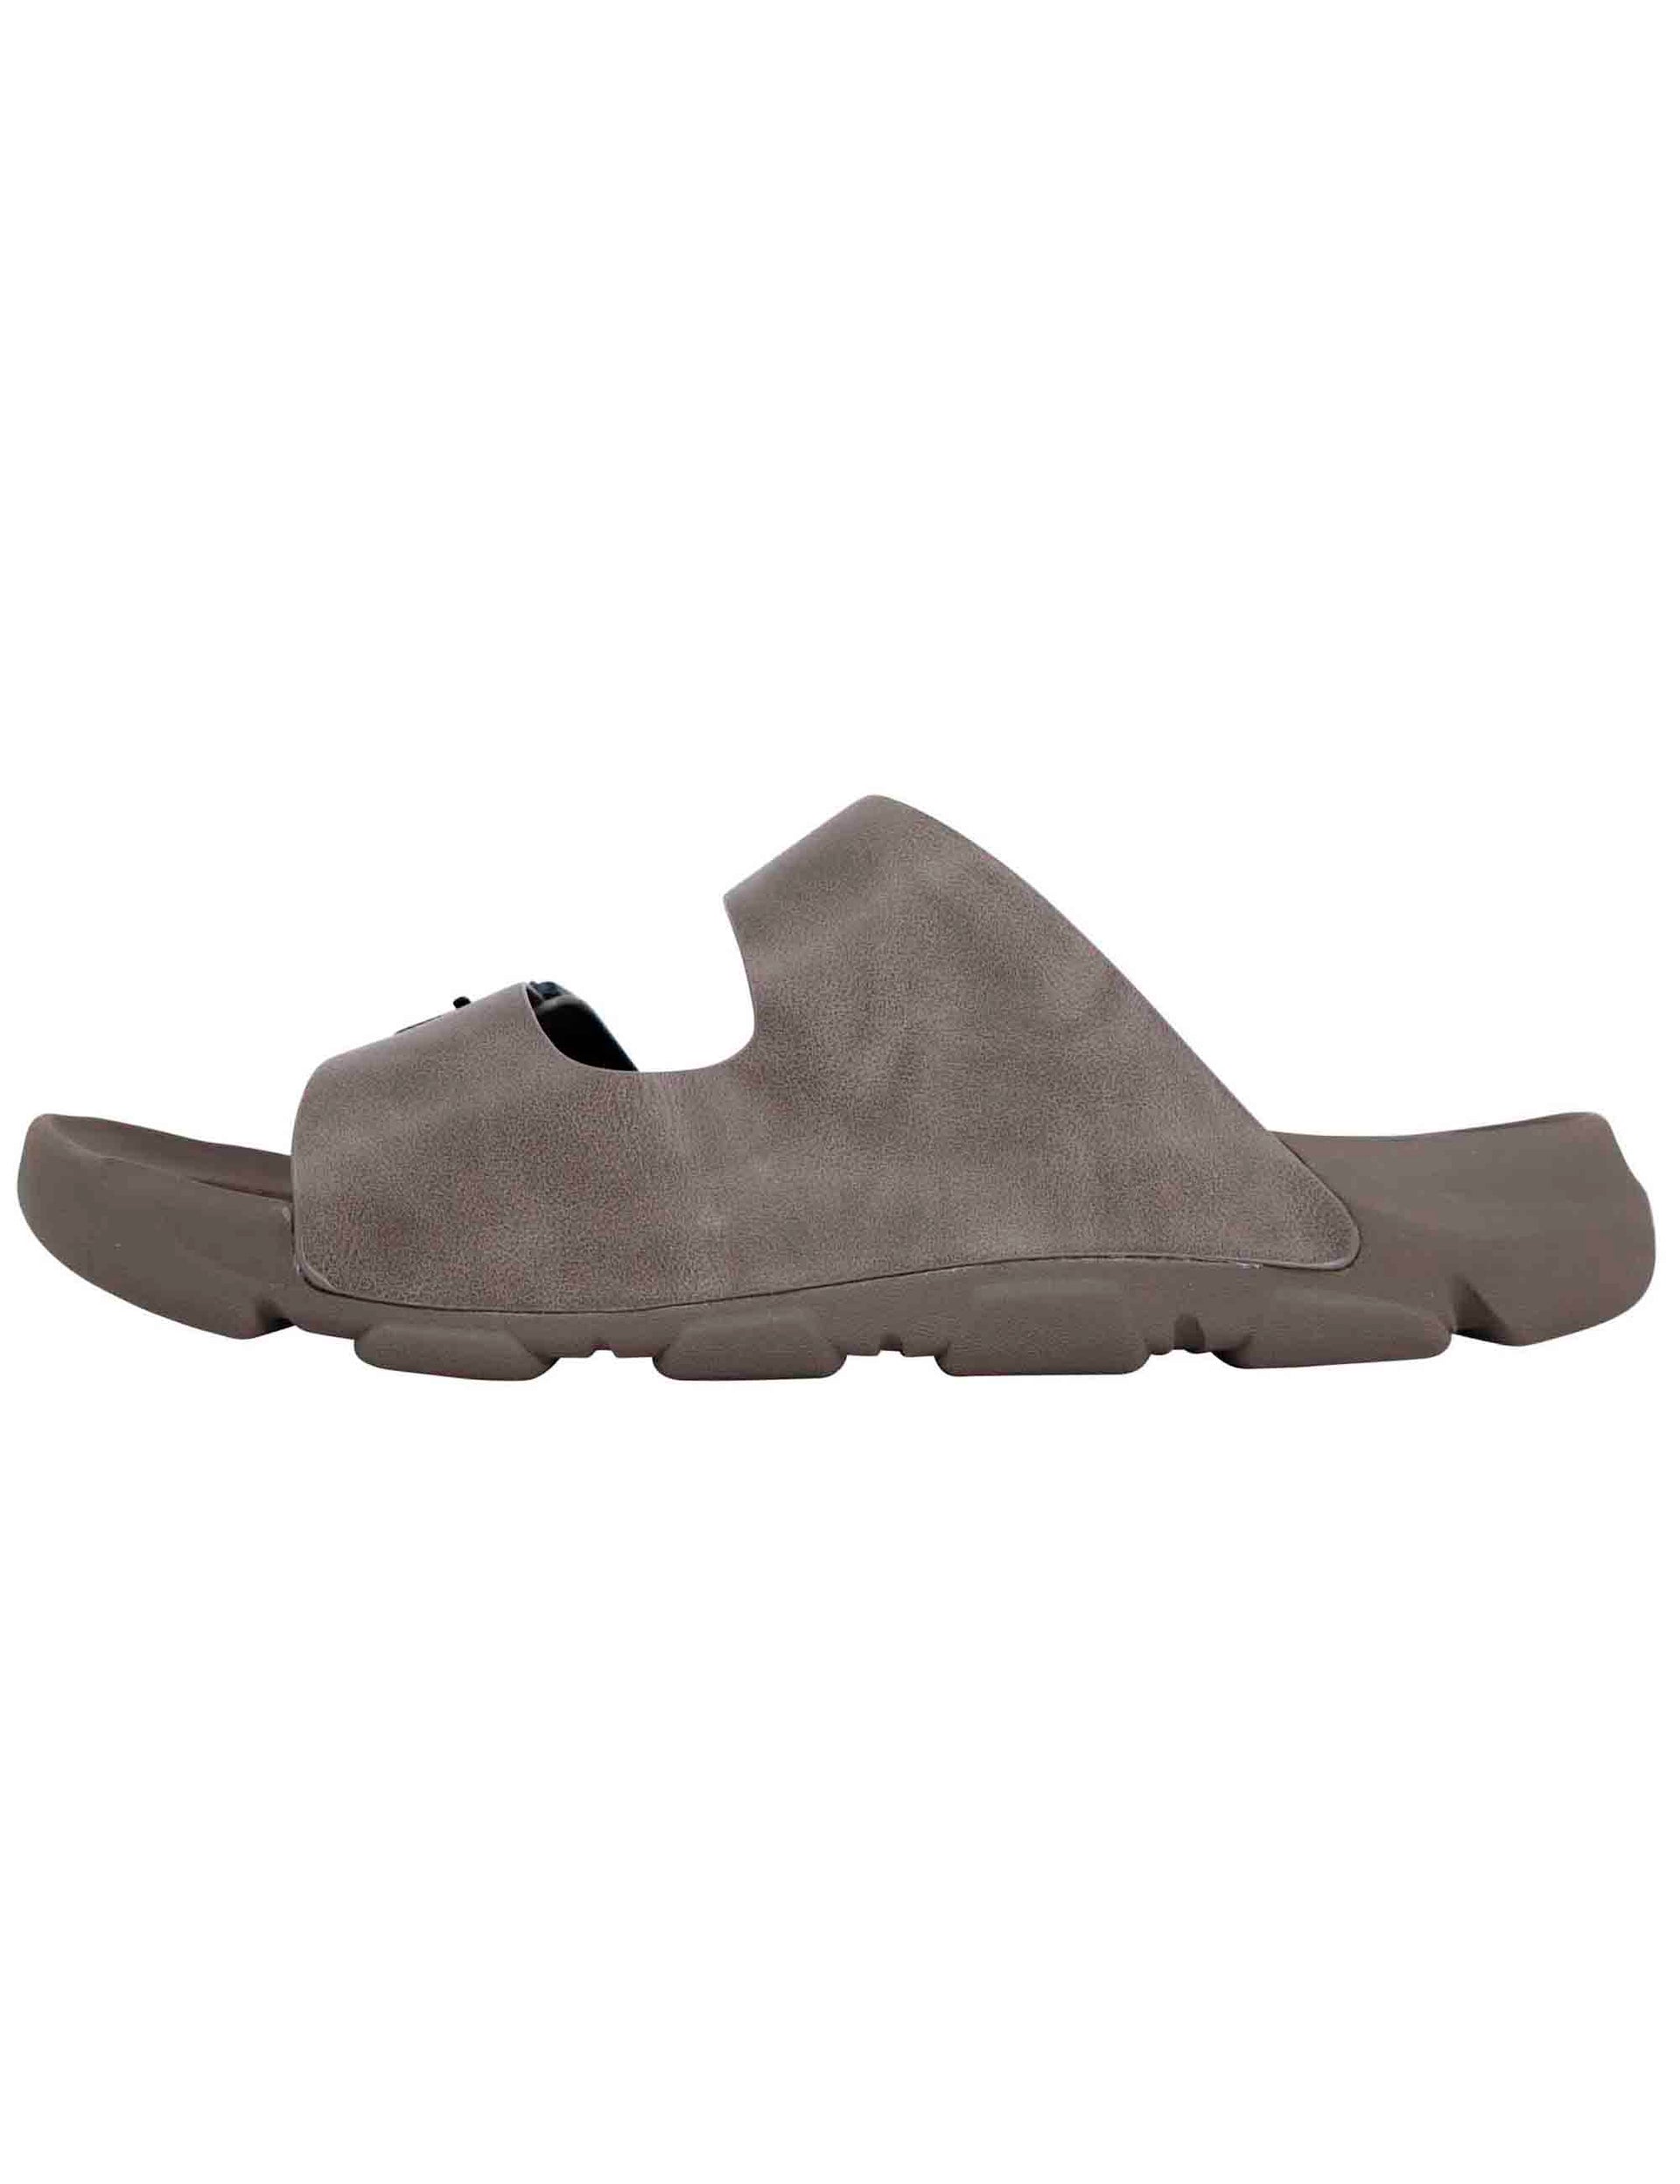 Daytona men's sandals in taupe leather